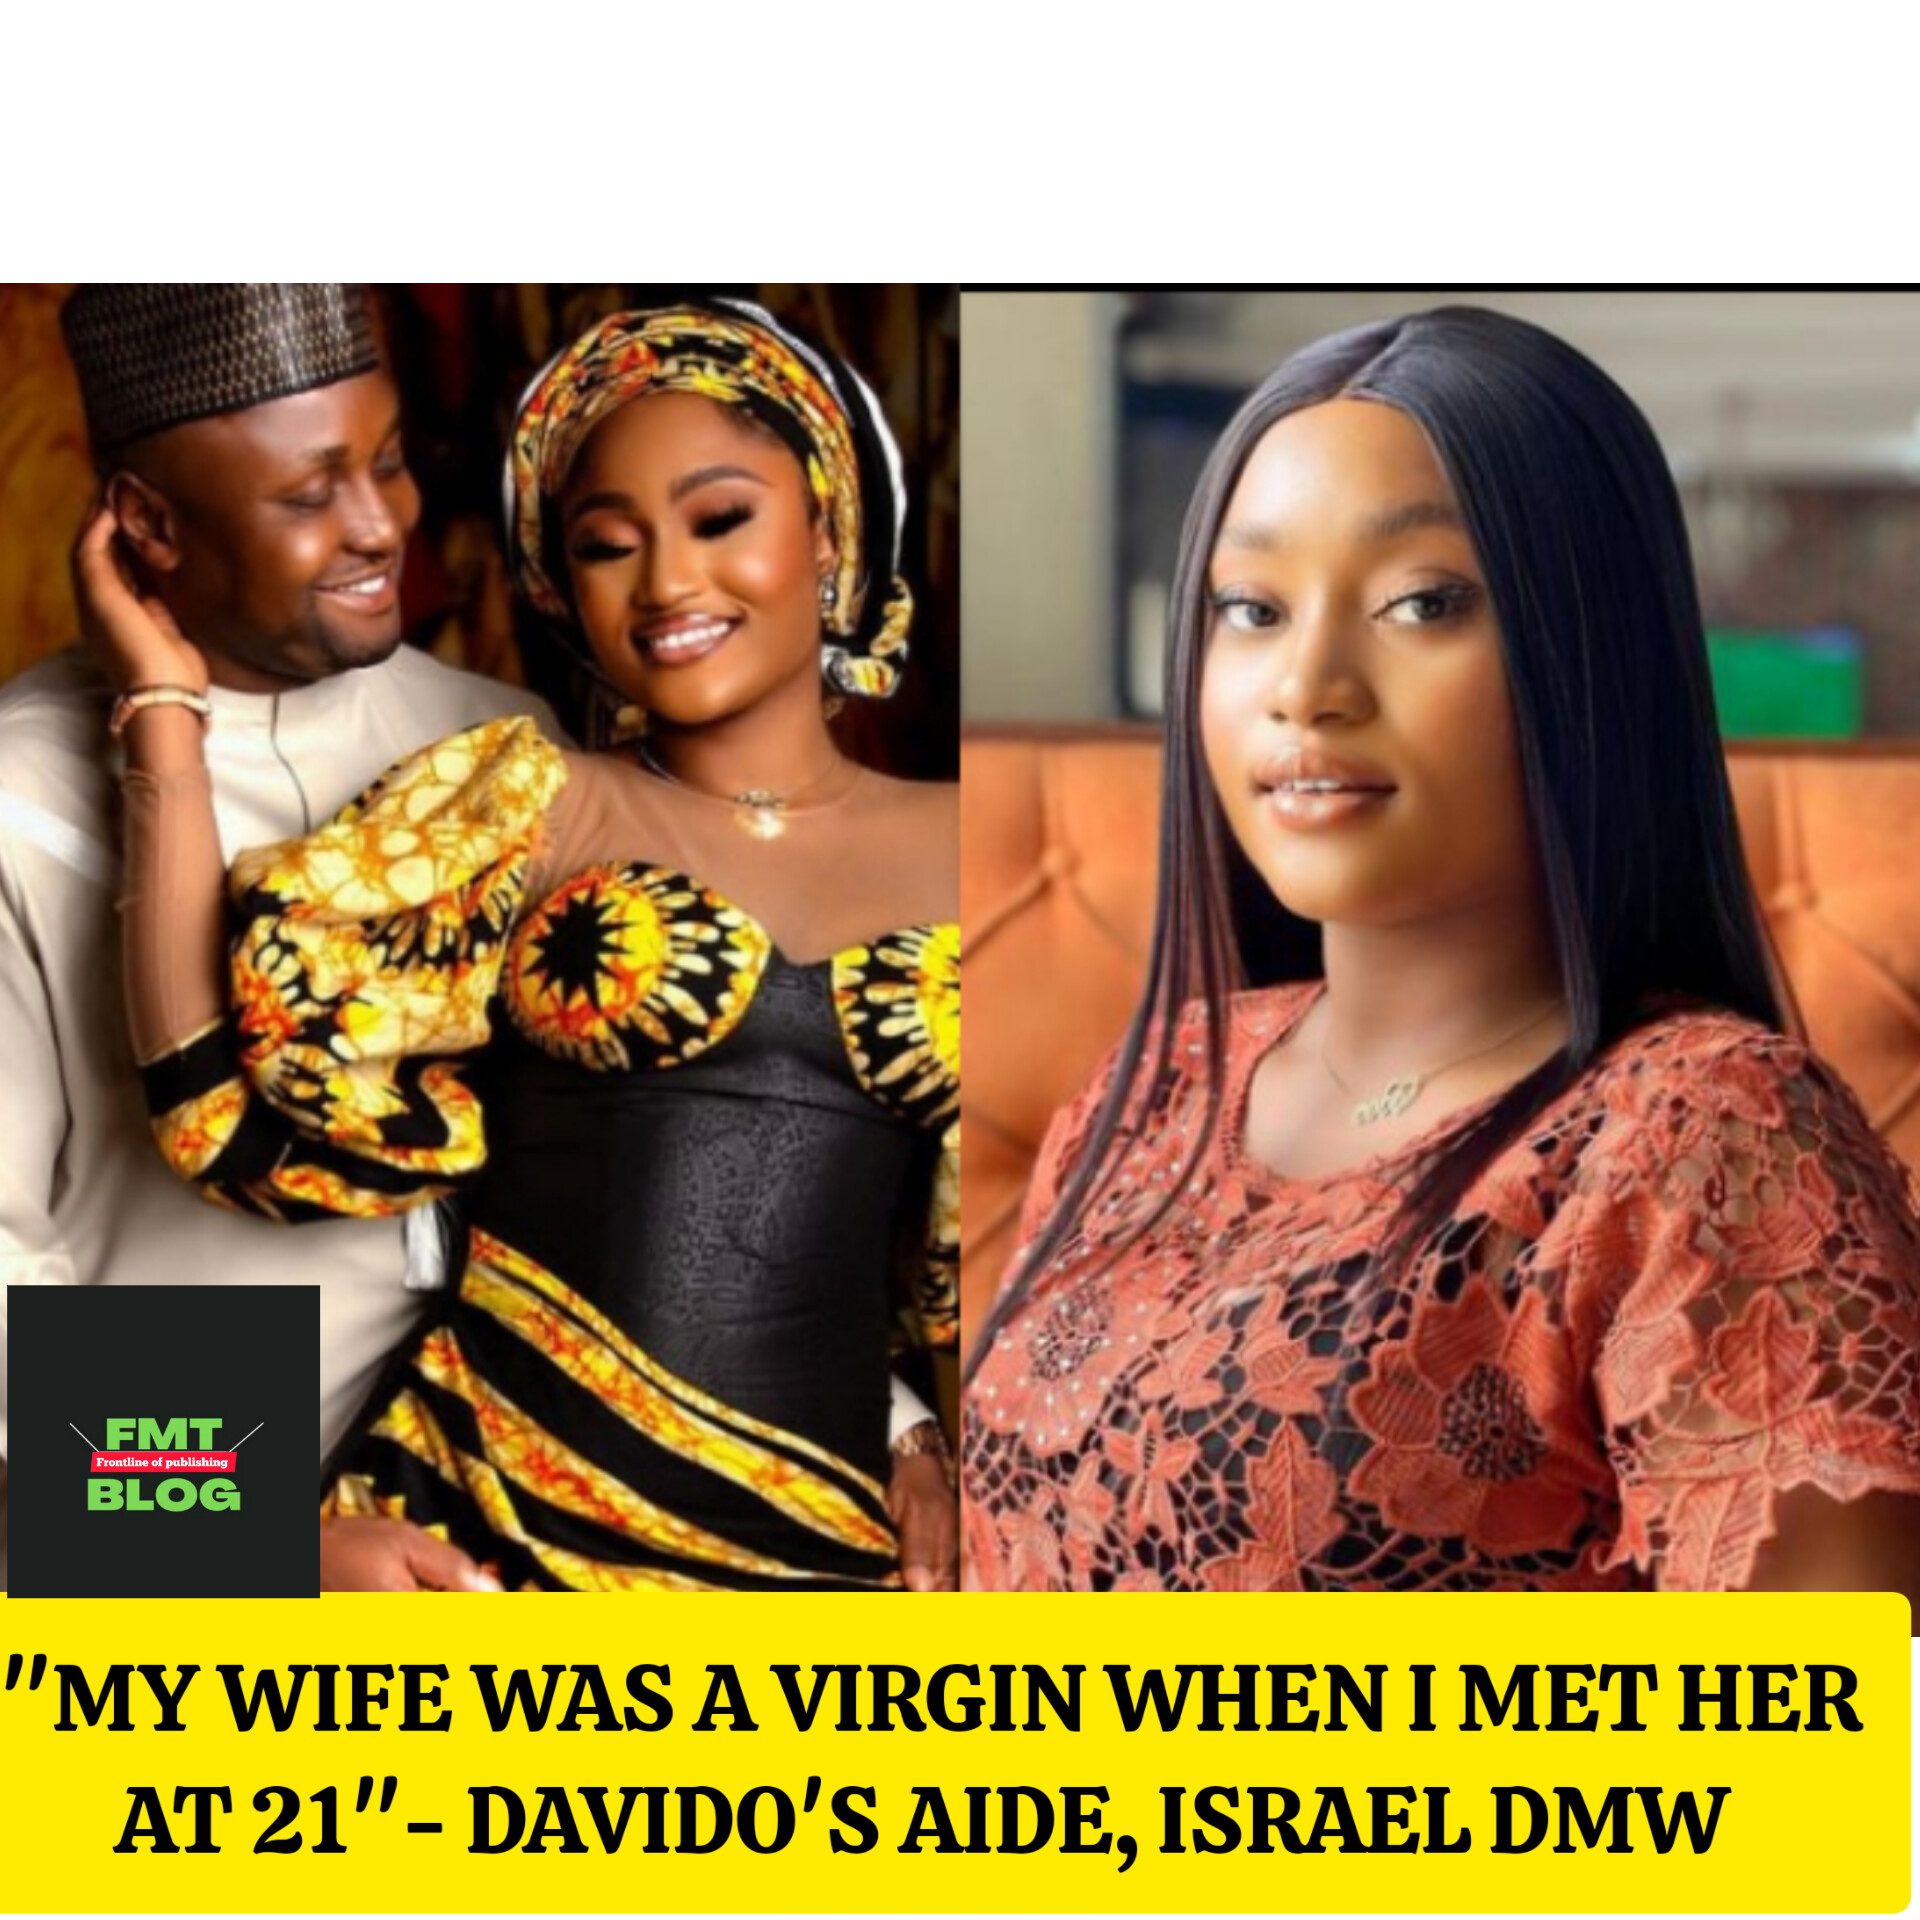 ”My Wife Was a Virgin When I Met Her at 21”- Davido’s Aide, Isreal DMW